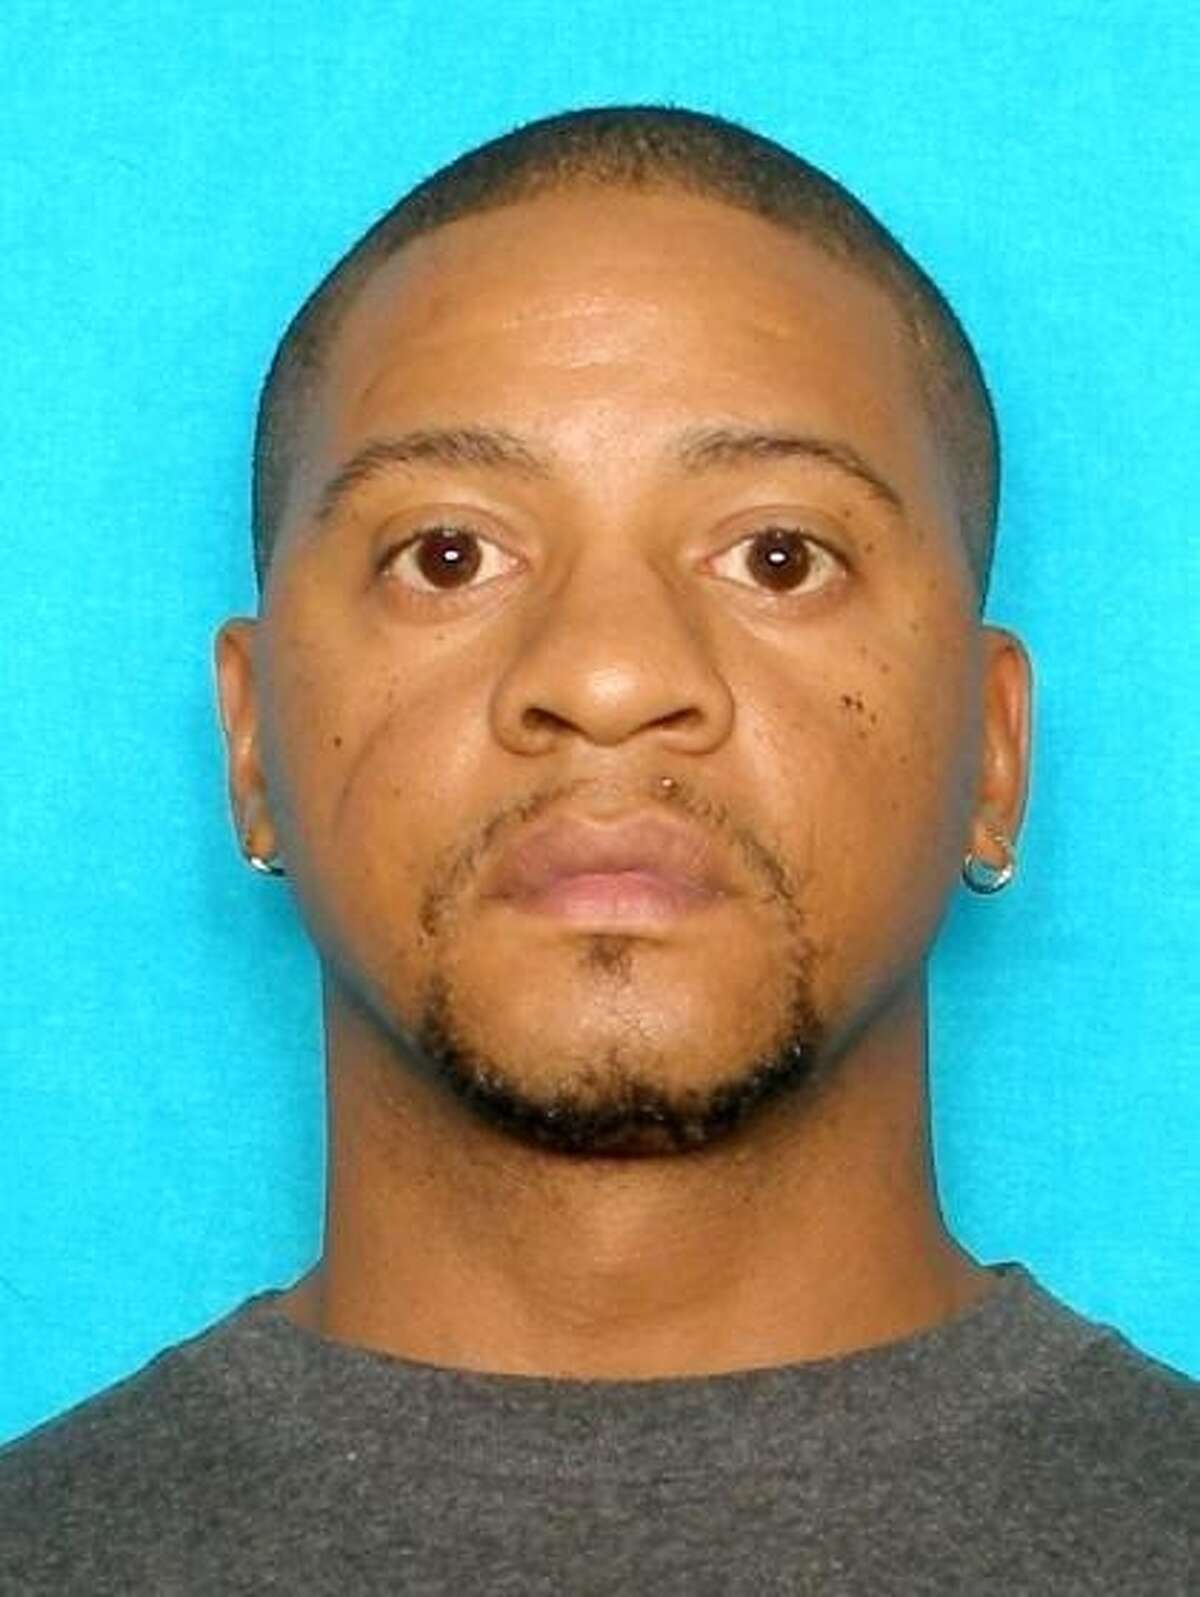 Christopher Bernard Doss, 41, is wanted on capital murder charges after gunning two people down Sunday on the West Side, according to police.